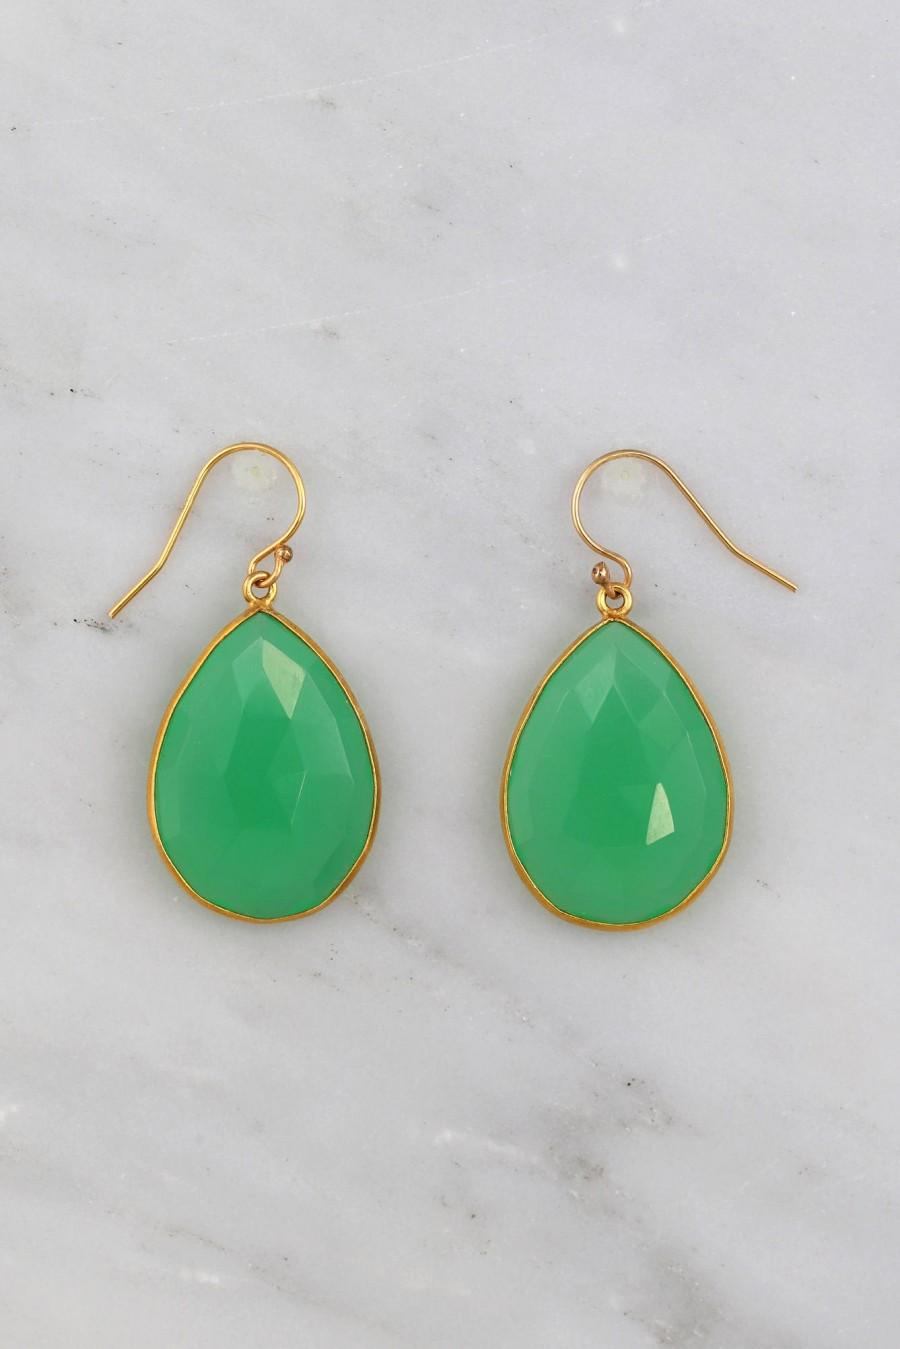 Wedding - Chrysoprase Earring, Drop and Dangle Earring, Green Gemstone Earring, Gold filled wires Earring, Large Gemstone Earring, Elegant Earring